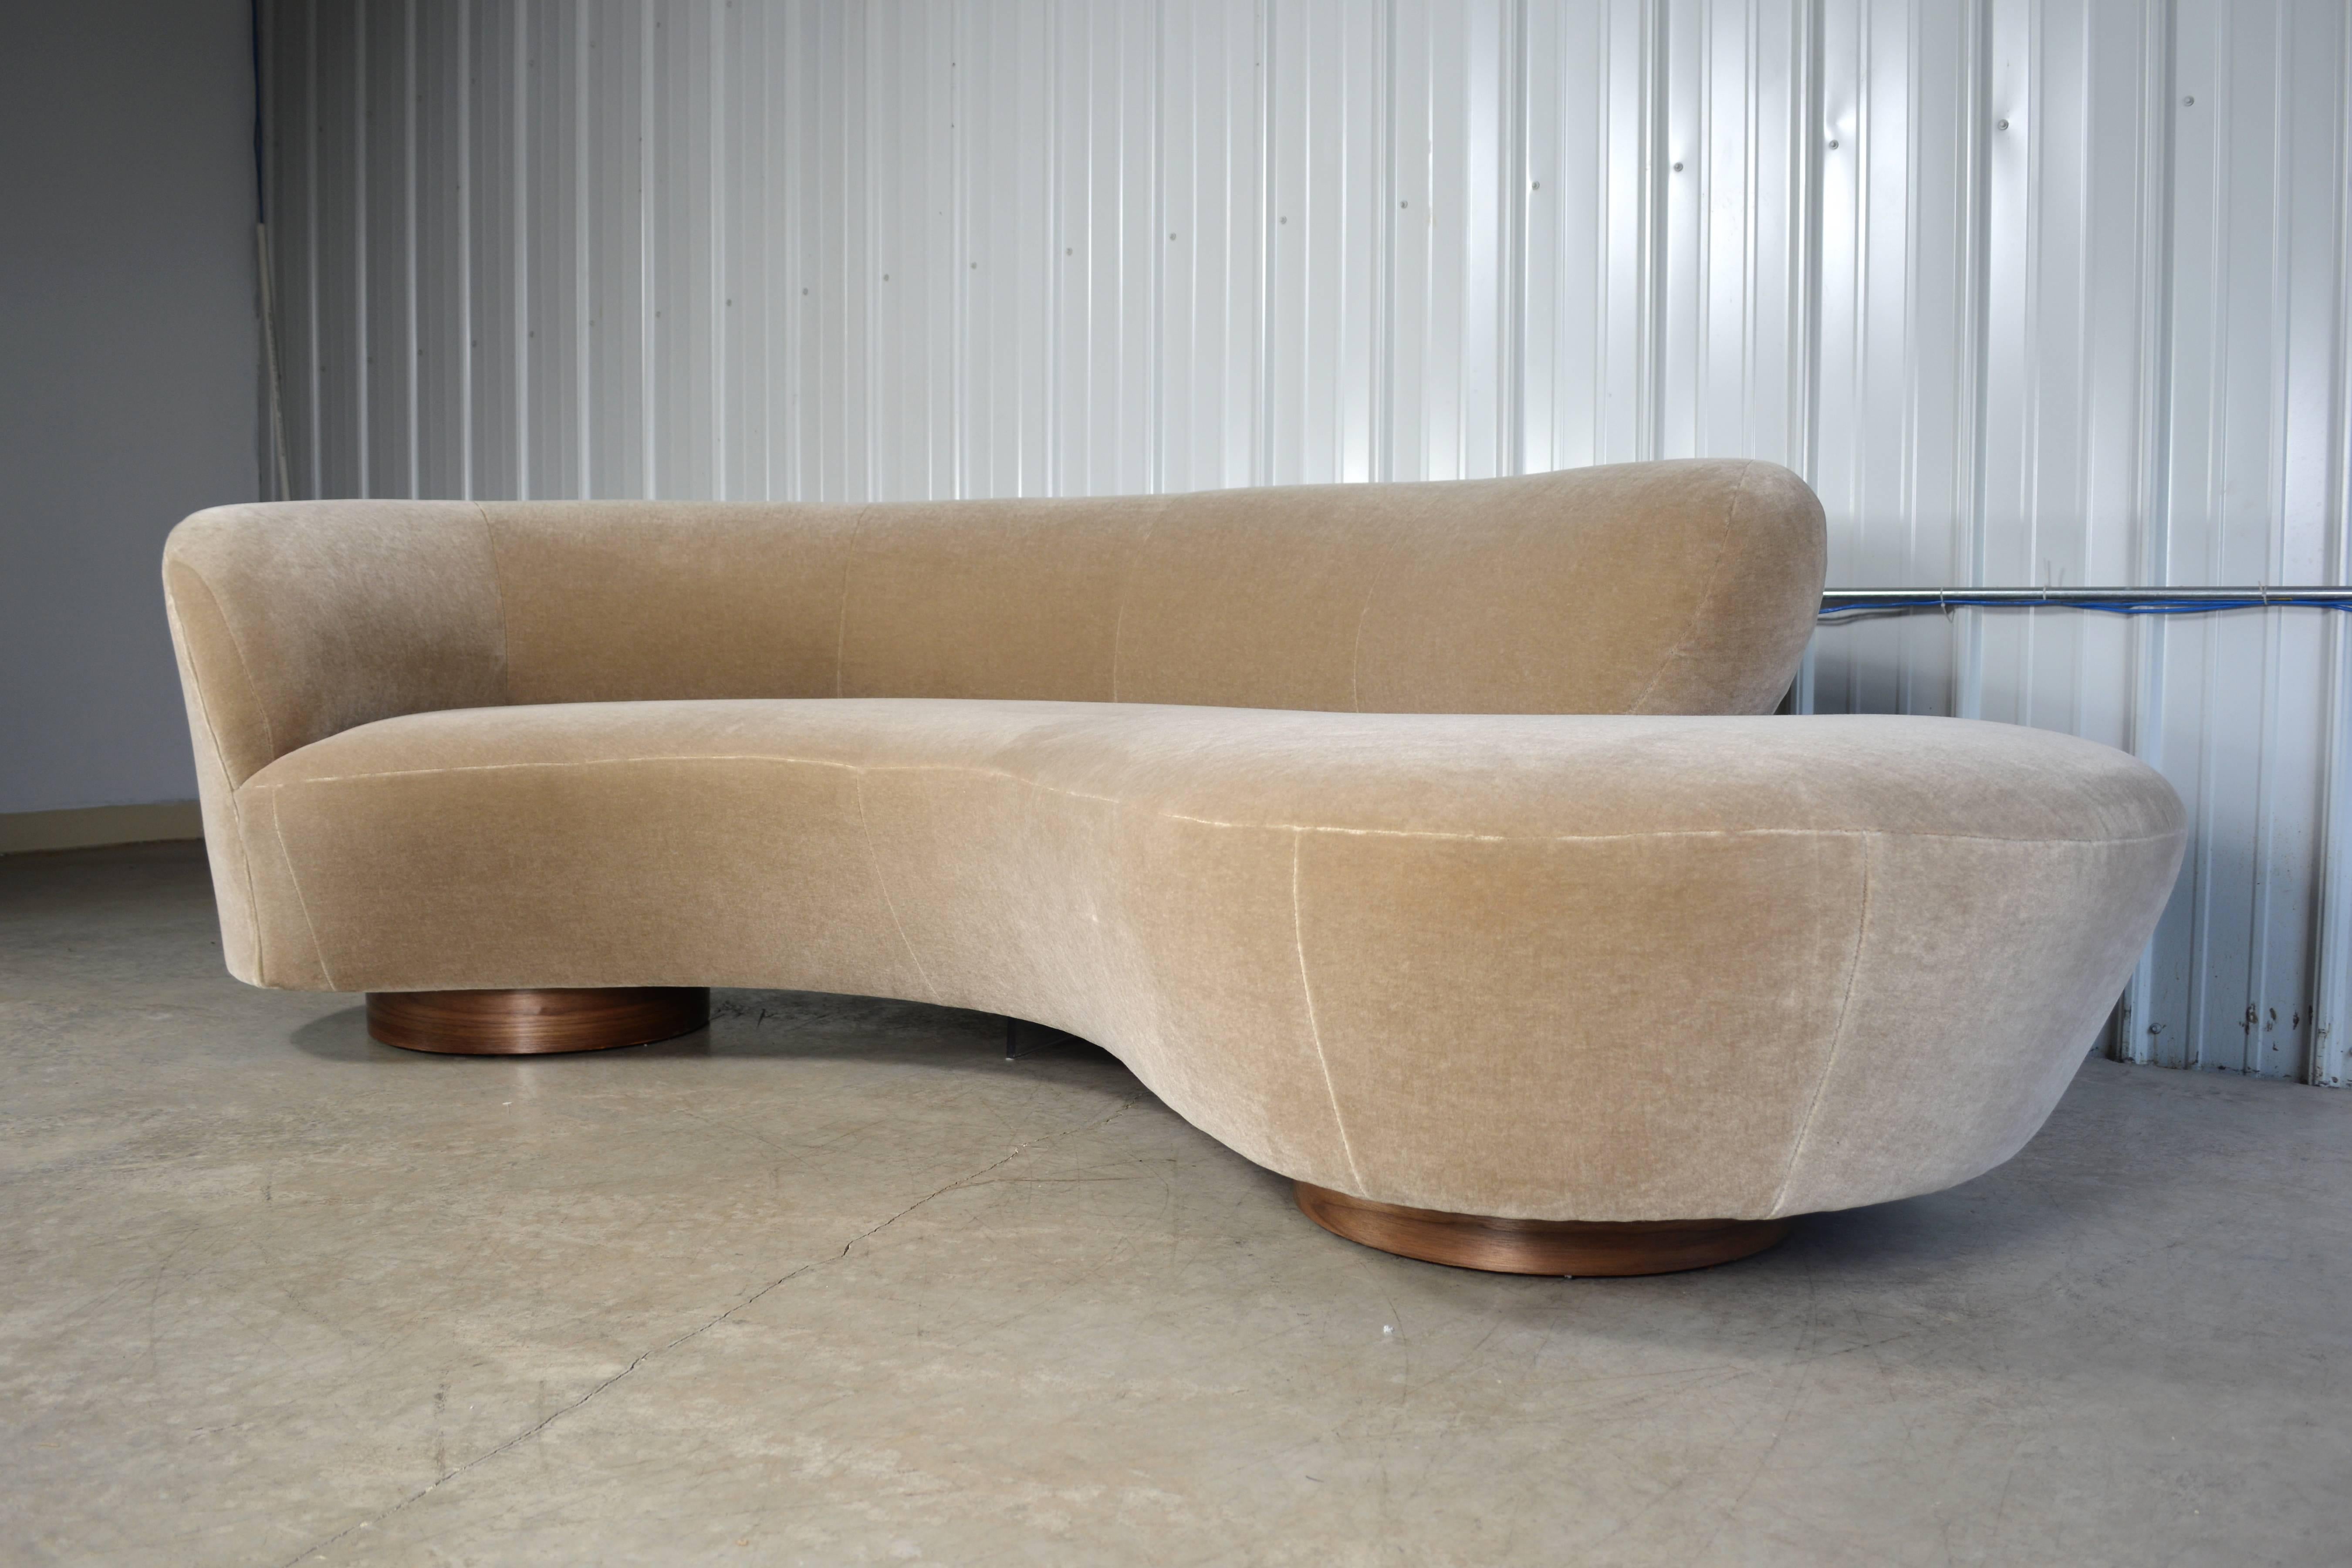 Vladimir Kagan sofa for Directional. Newly restored and recovered in mohair. Directional label present.